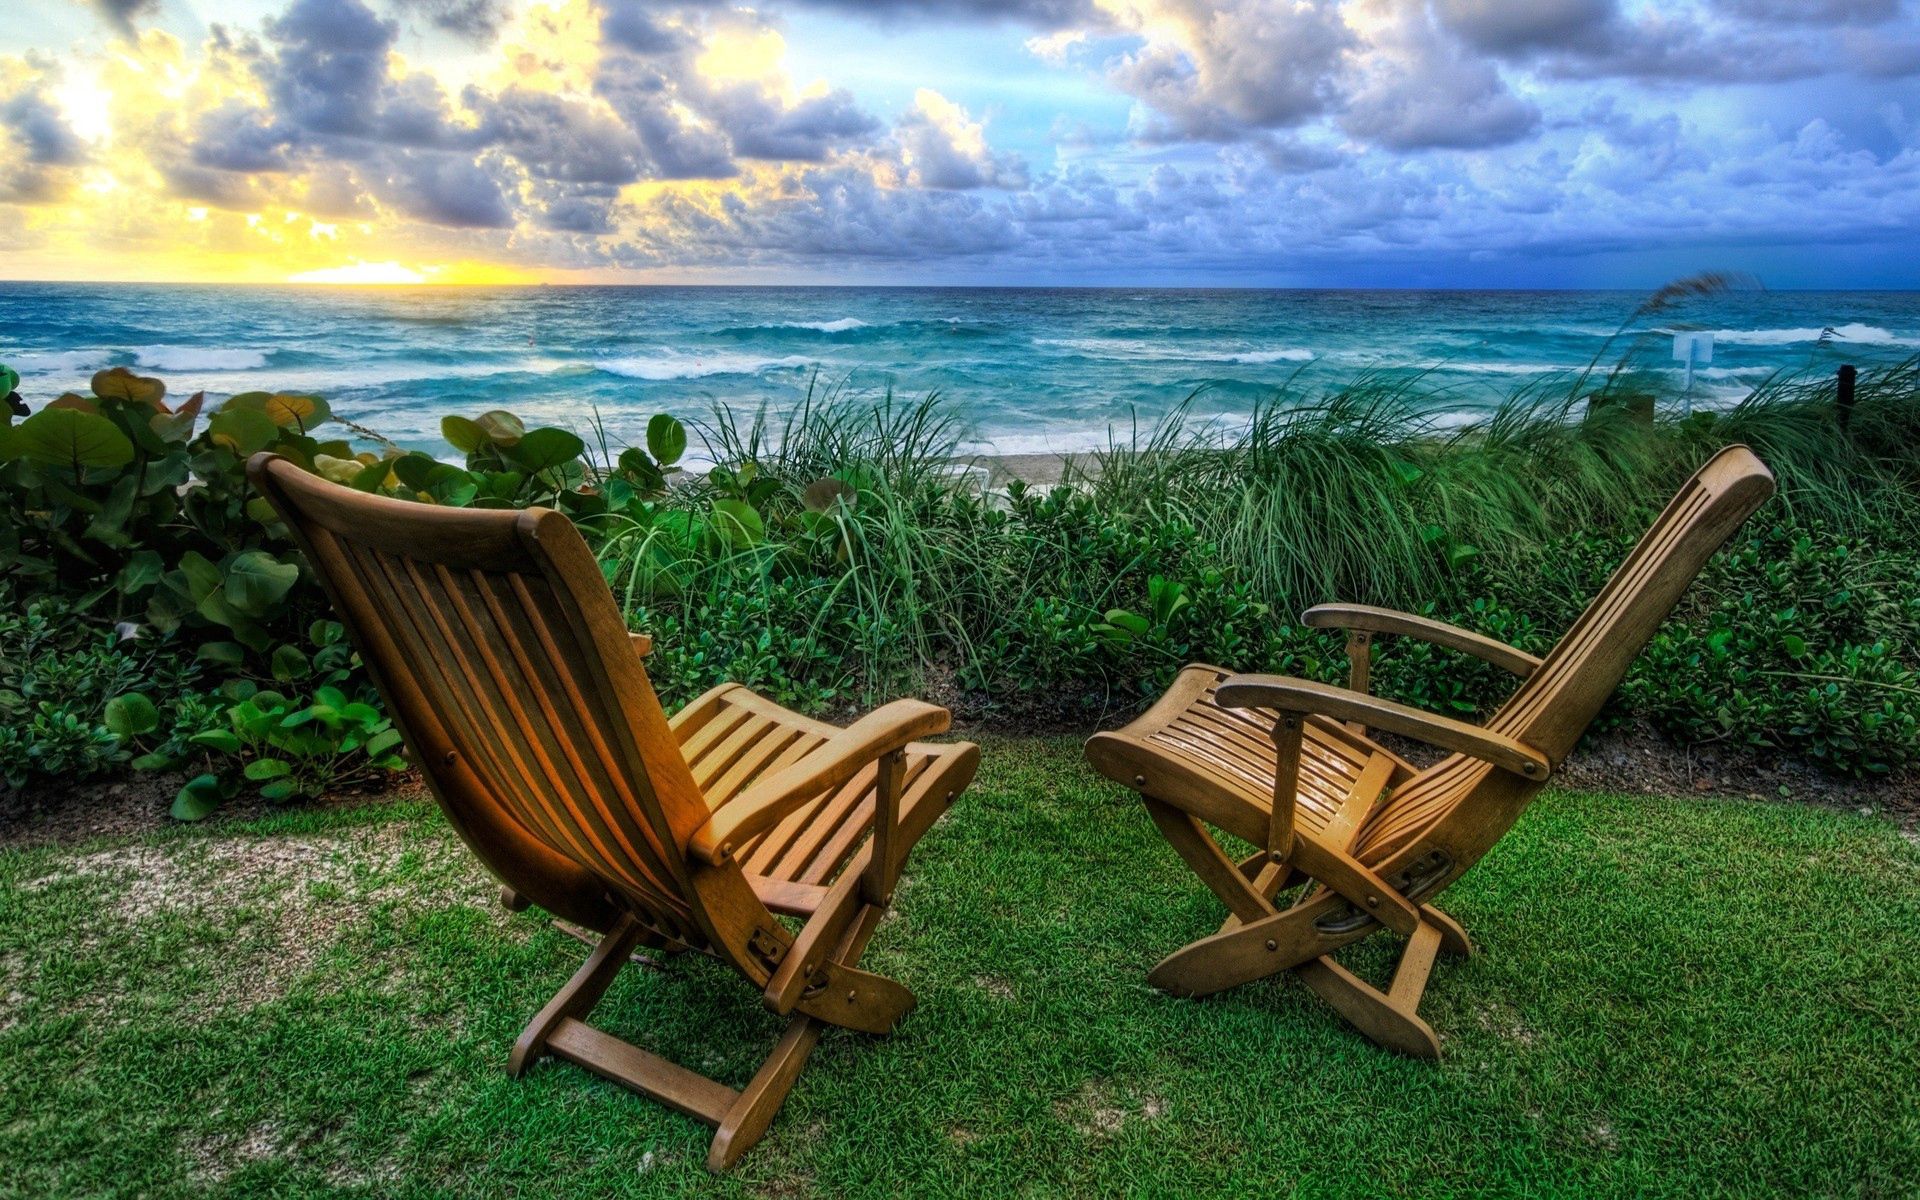 shore, nature, sunset, sea, bank, chairs, armchairs